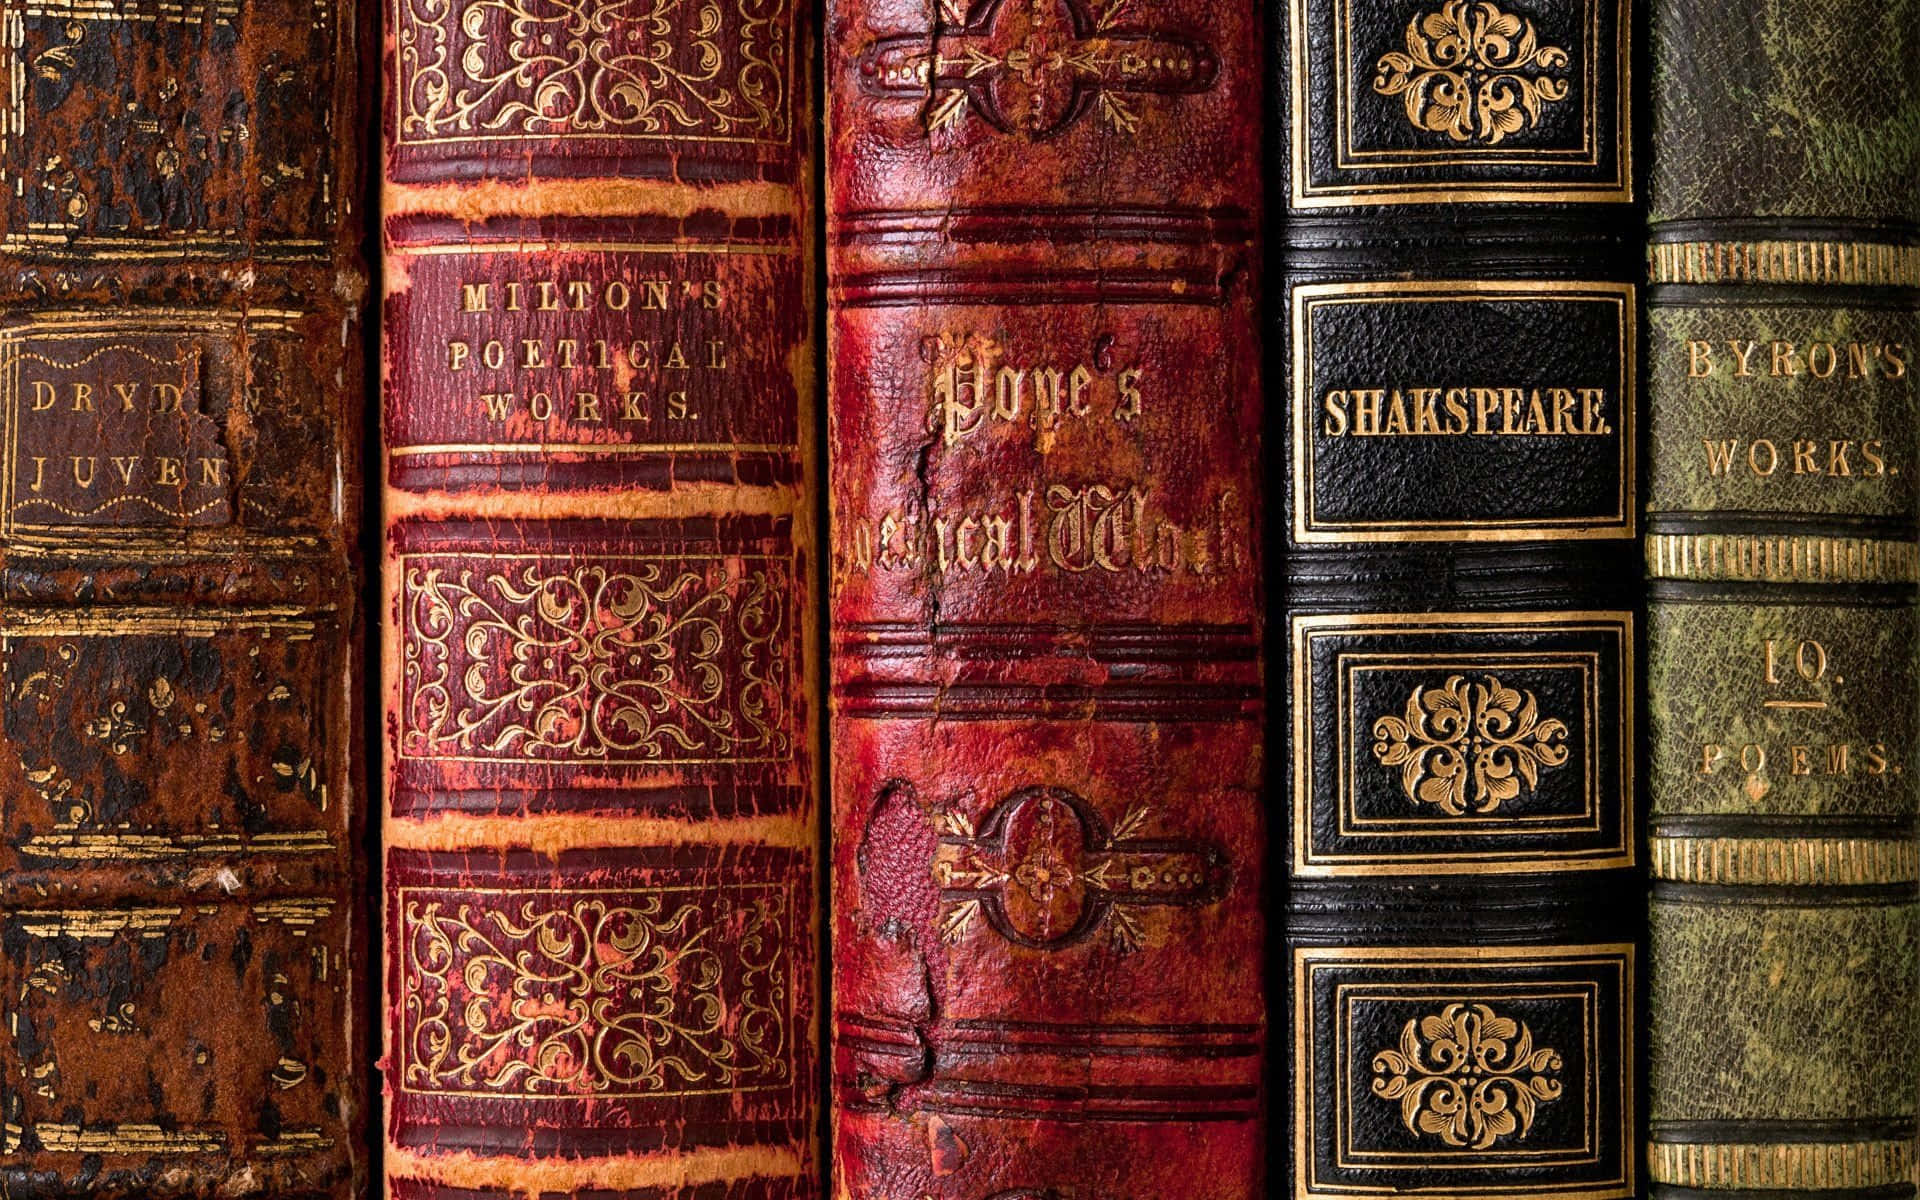 A Row Of Old Books With Gold And Silver Designs